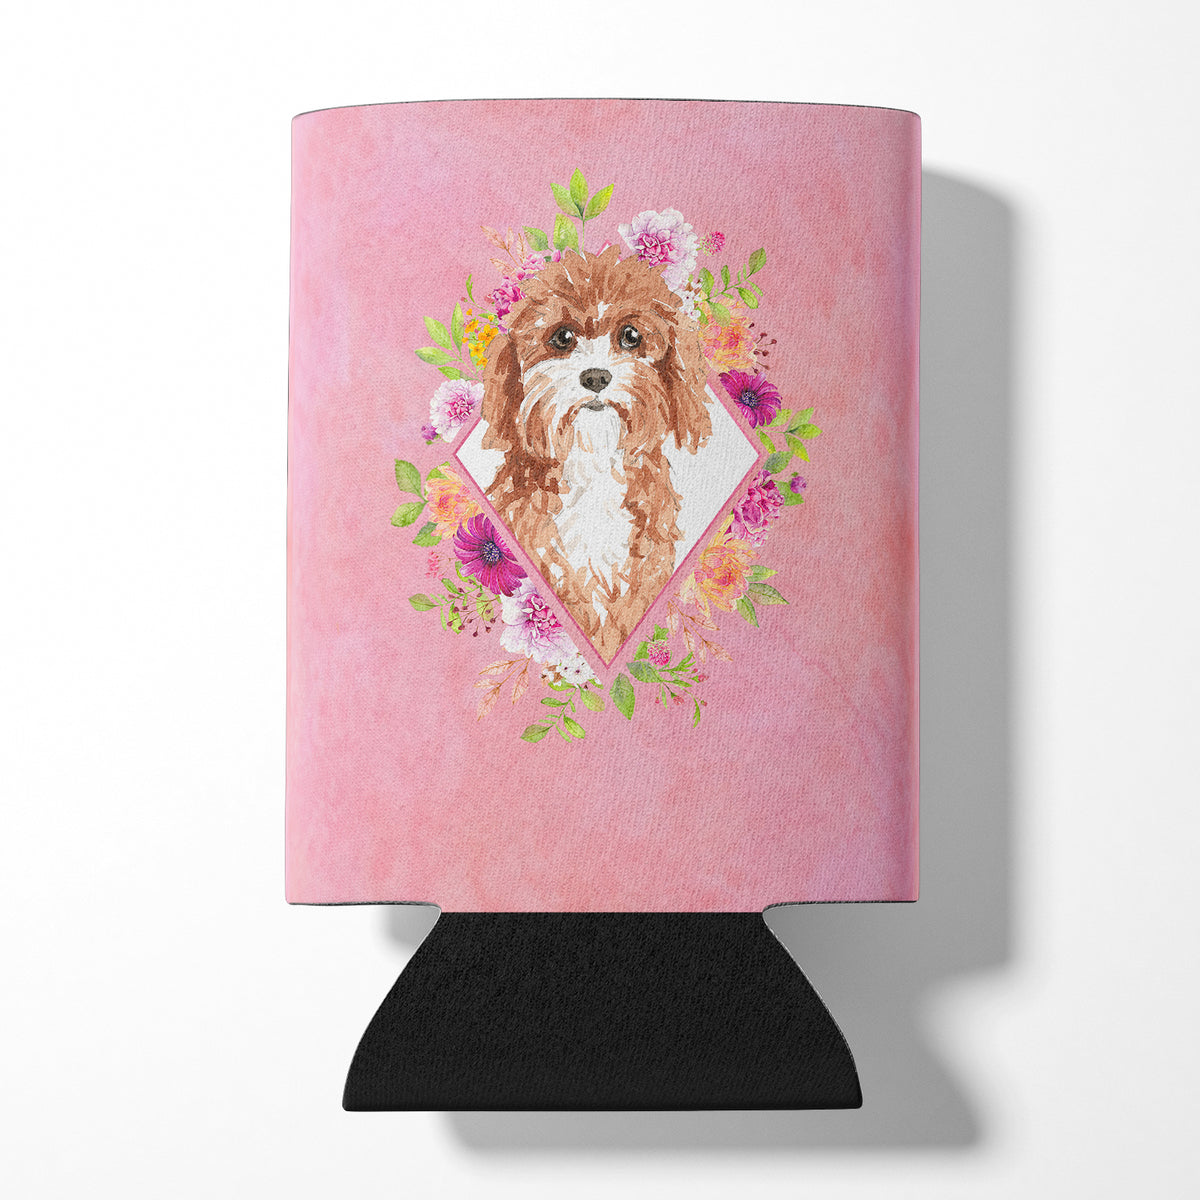 Cavapoo Pink Flowers Can or Bottle Hugger CK4247CC